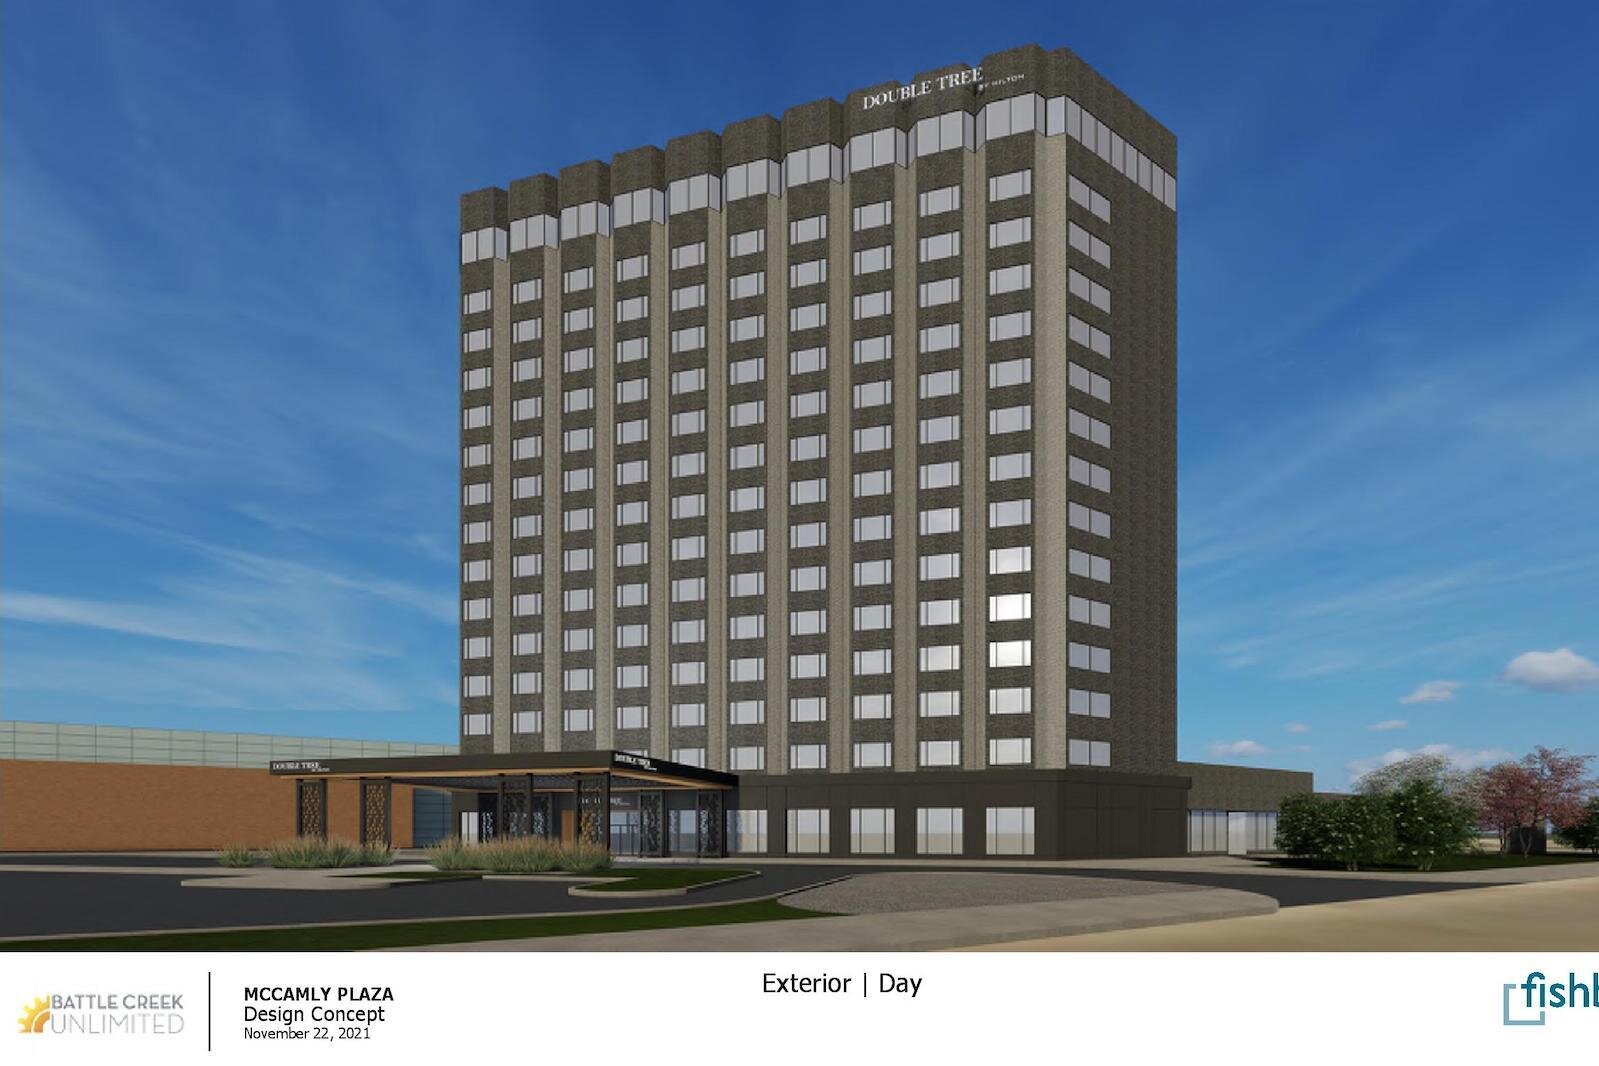 The exterior of the Double Tree by day as shown in a design concept.